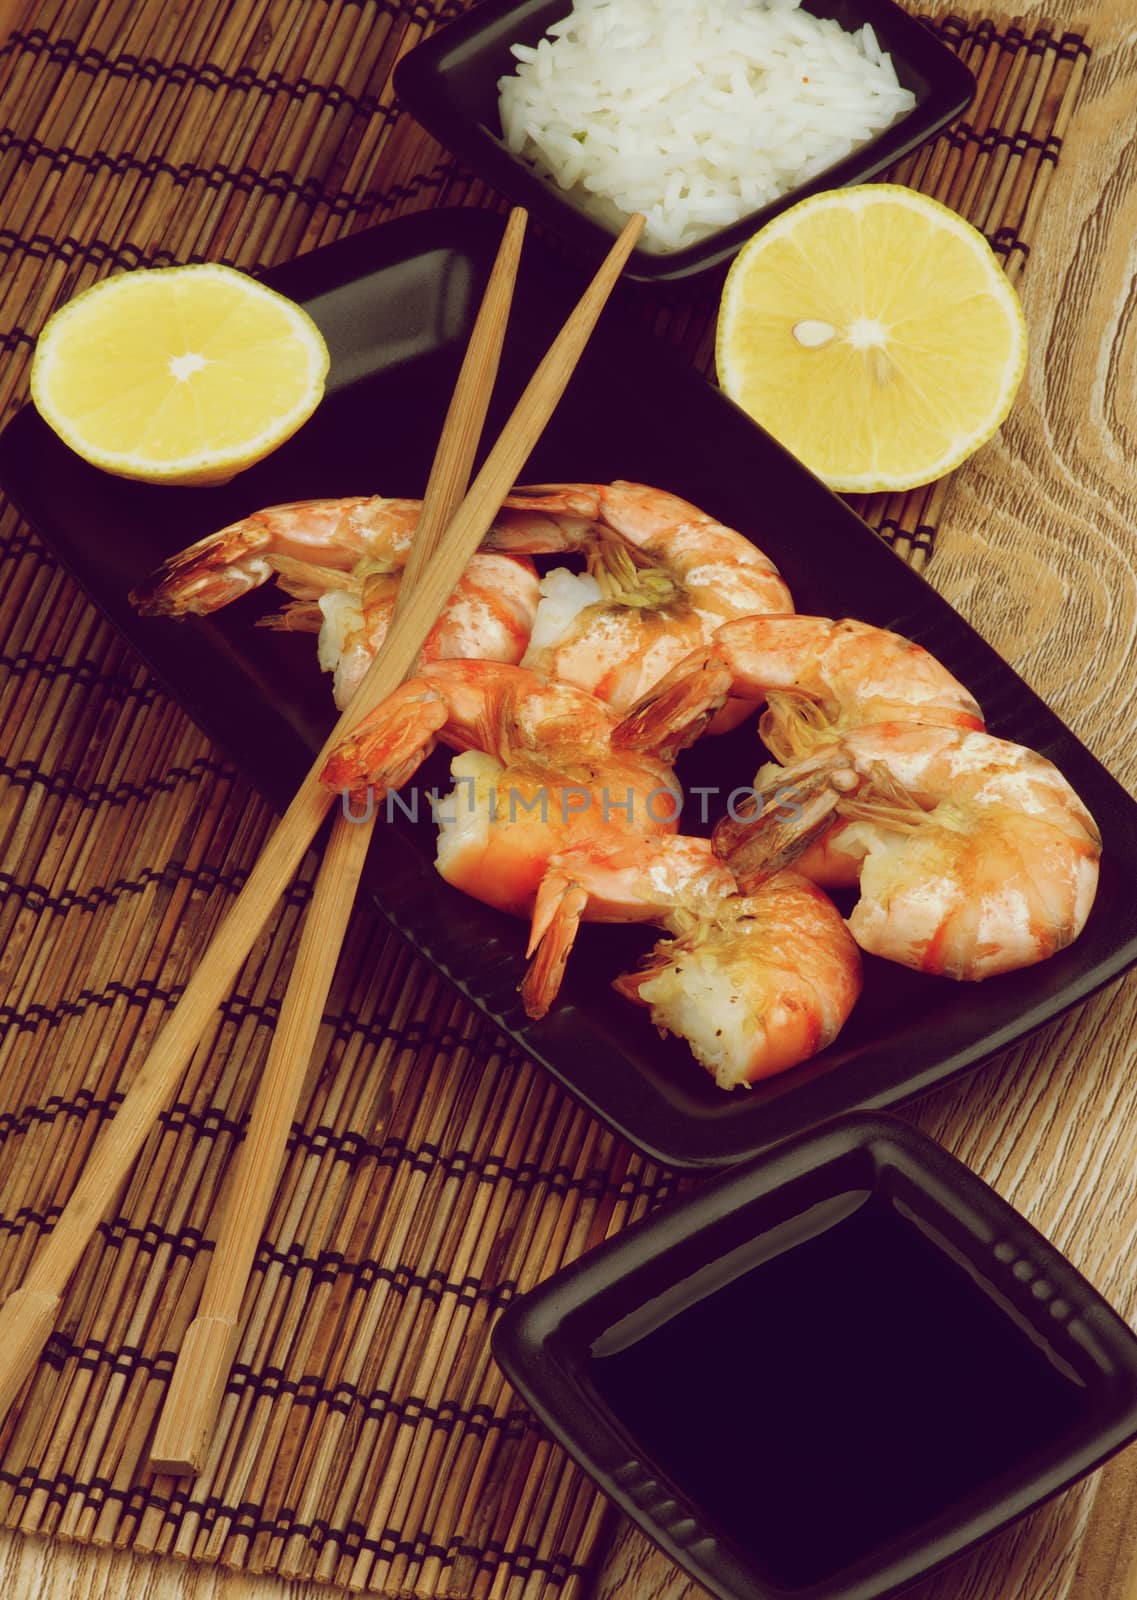 Delicious Roasted Shrimps with Soy Sauce, Boiled Rice, Lemons and Chopsticks in Asian Style closeup Straw Mat background